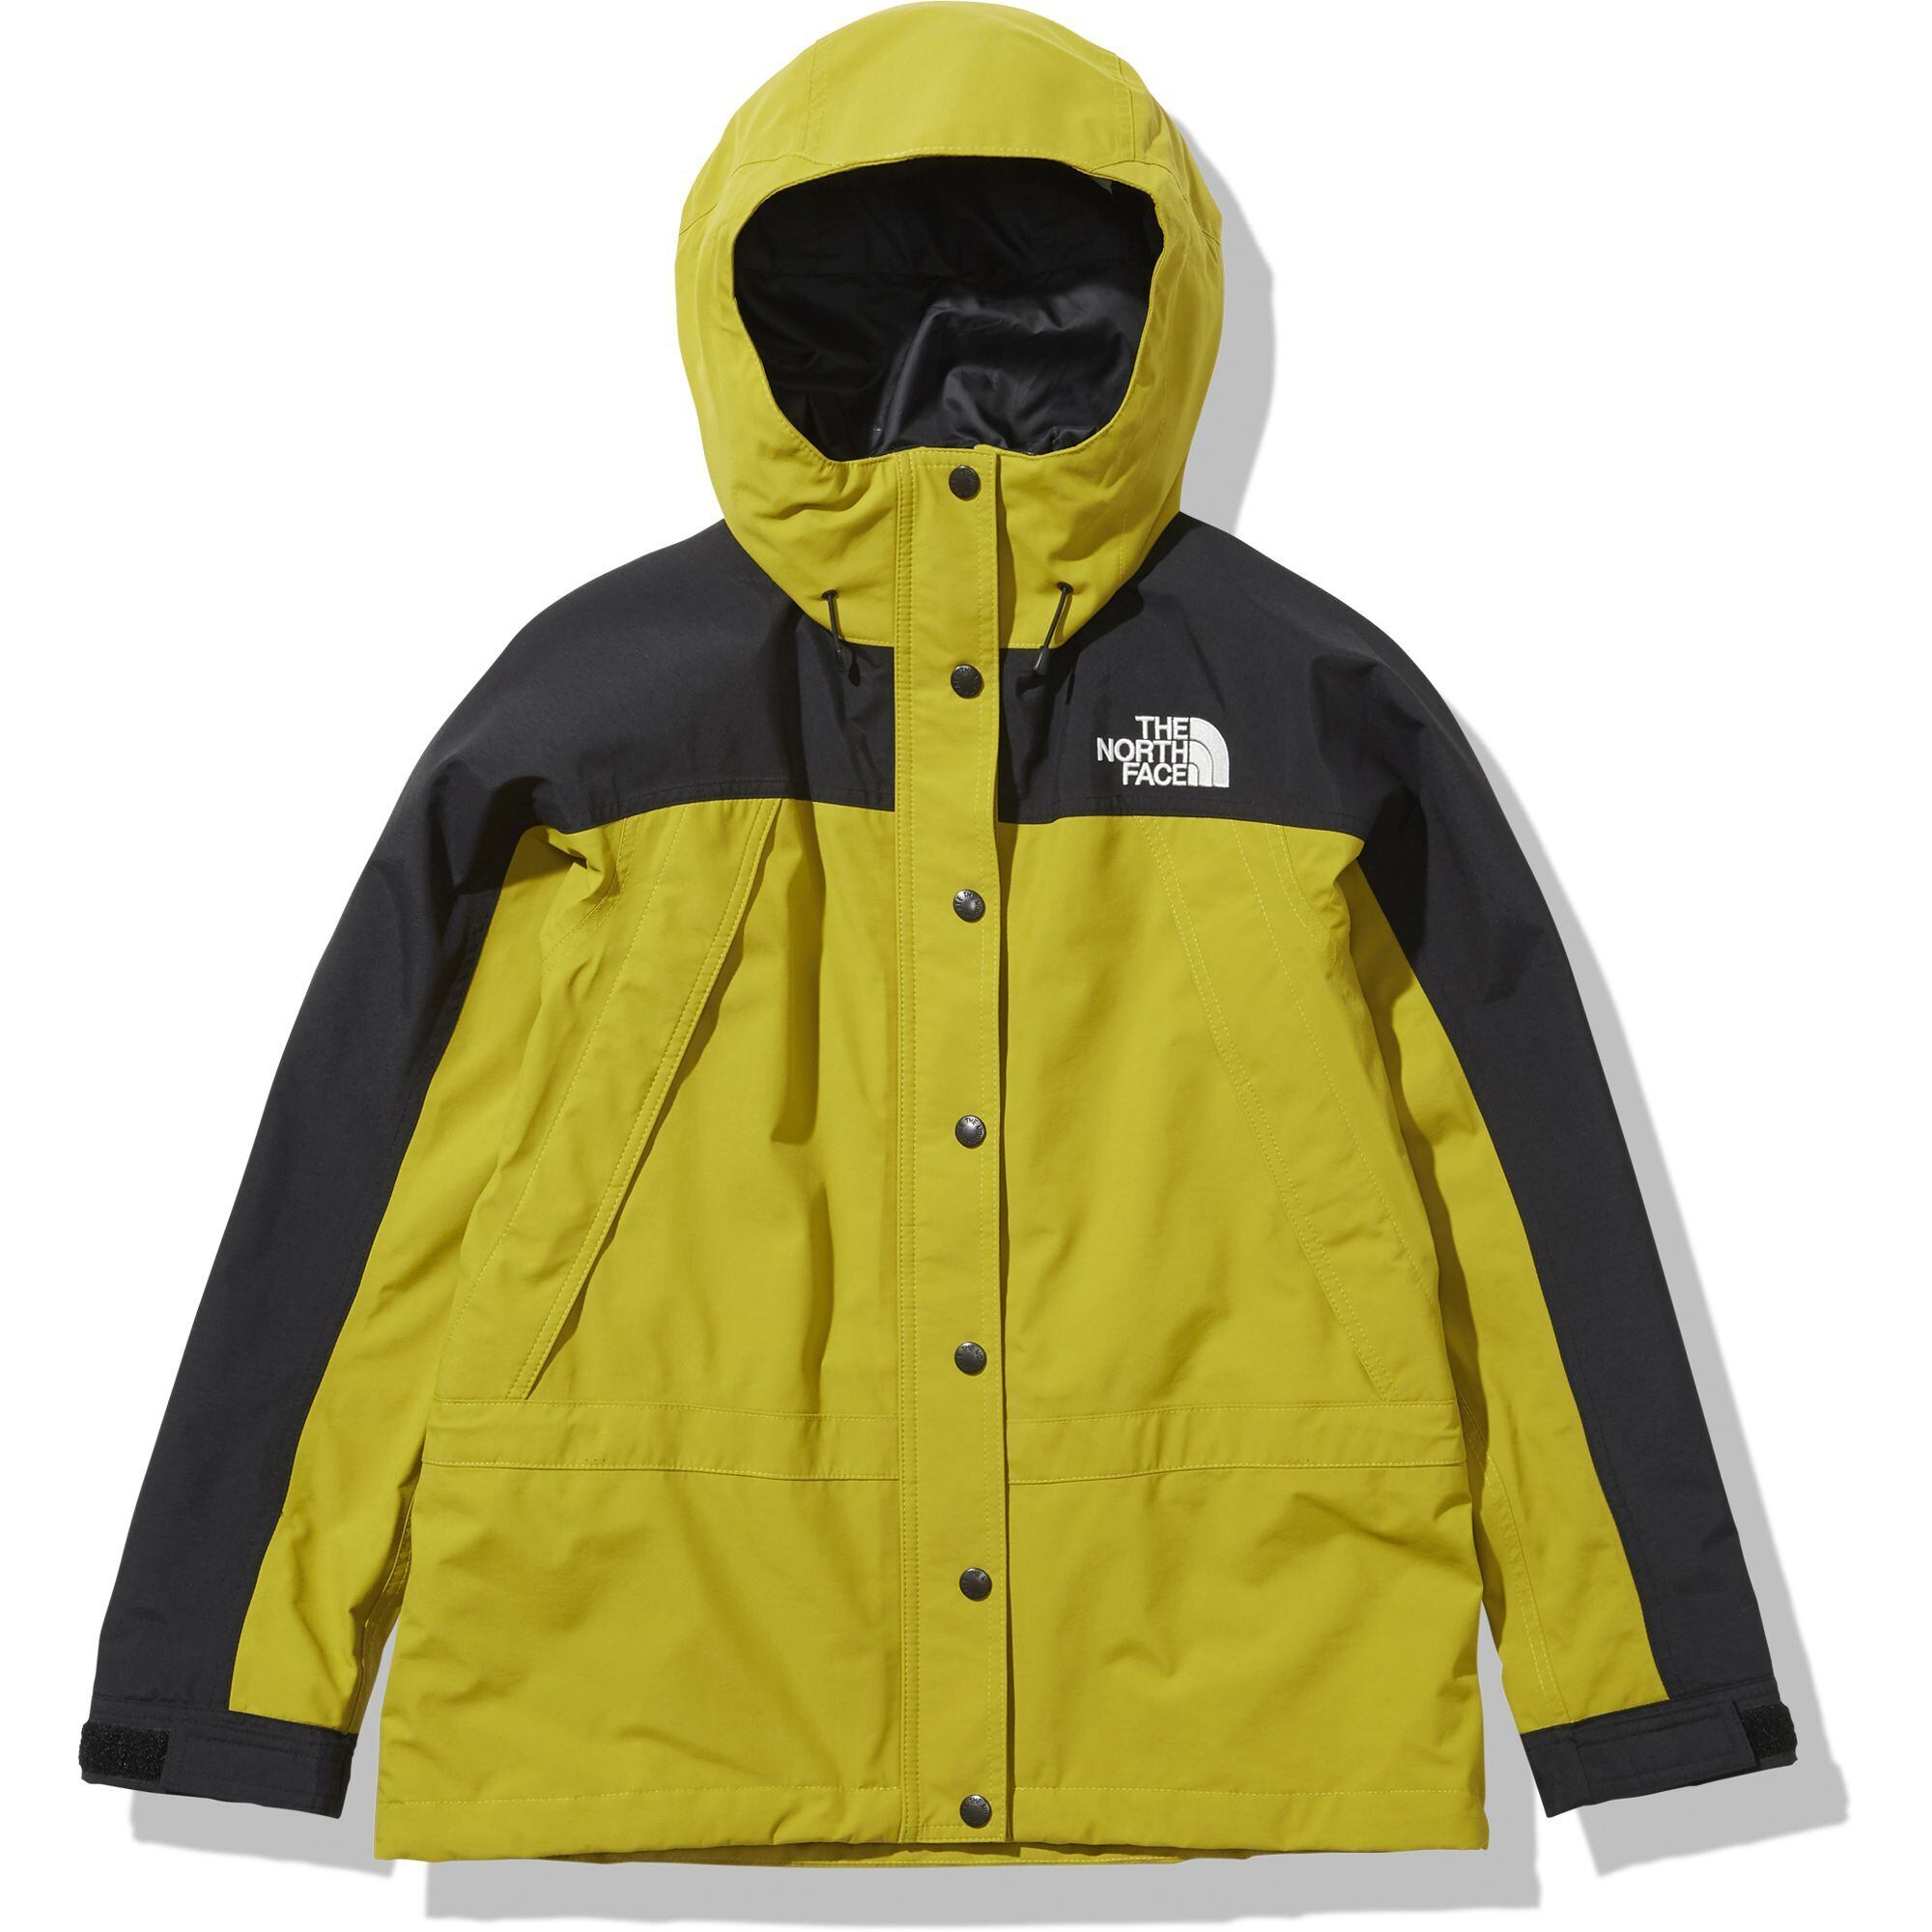 THE NORTH FACE / MOUNTAIN LIGHT JACKET | st. valley house - セント ...